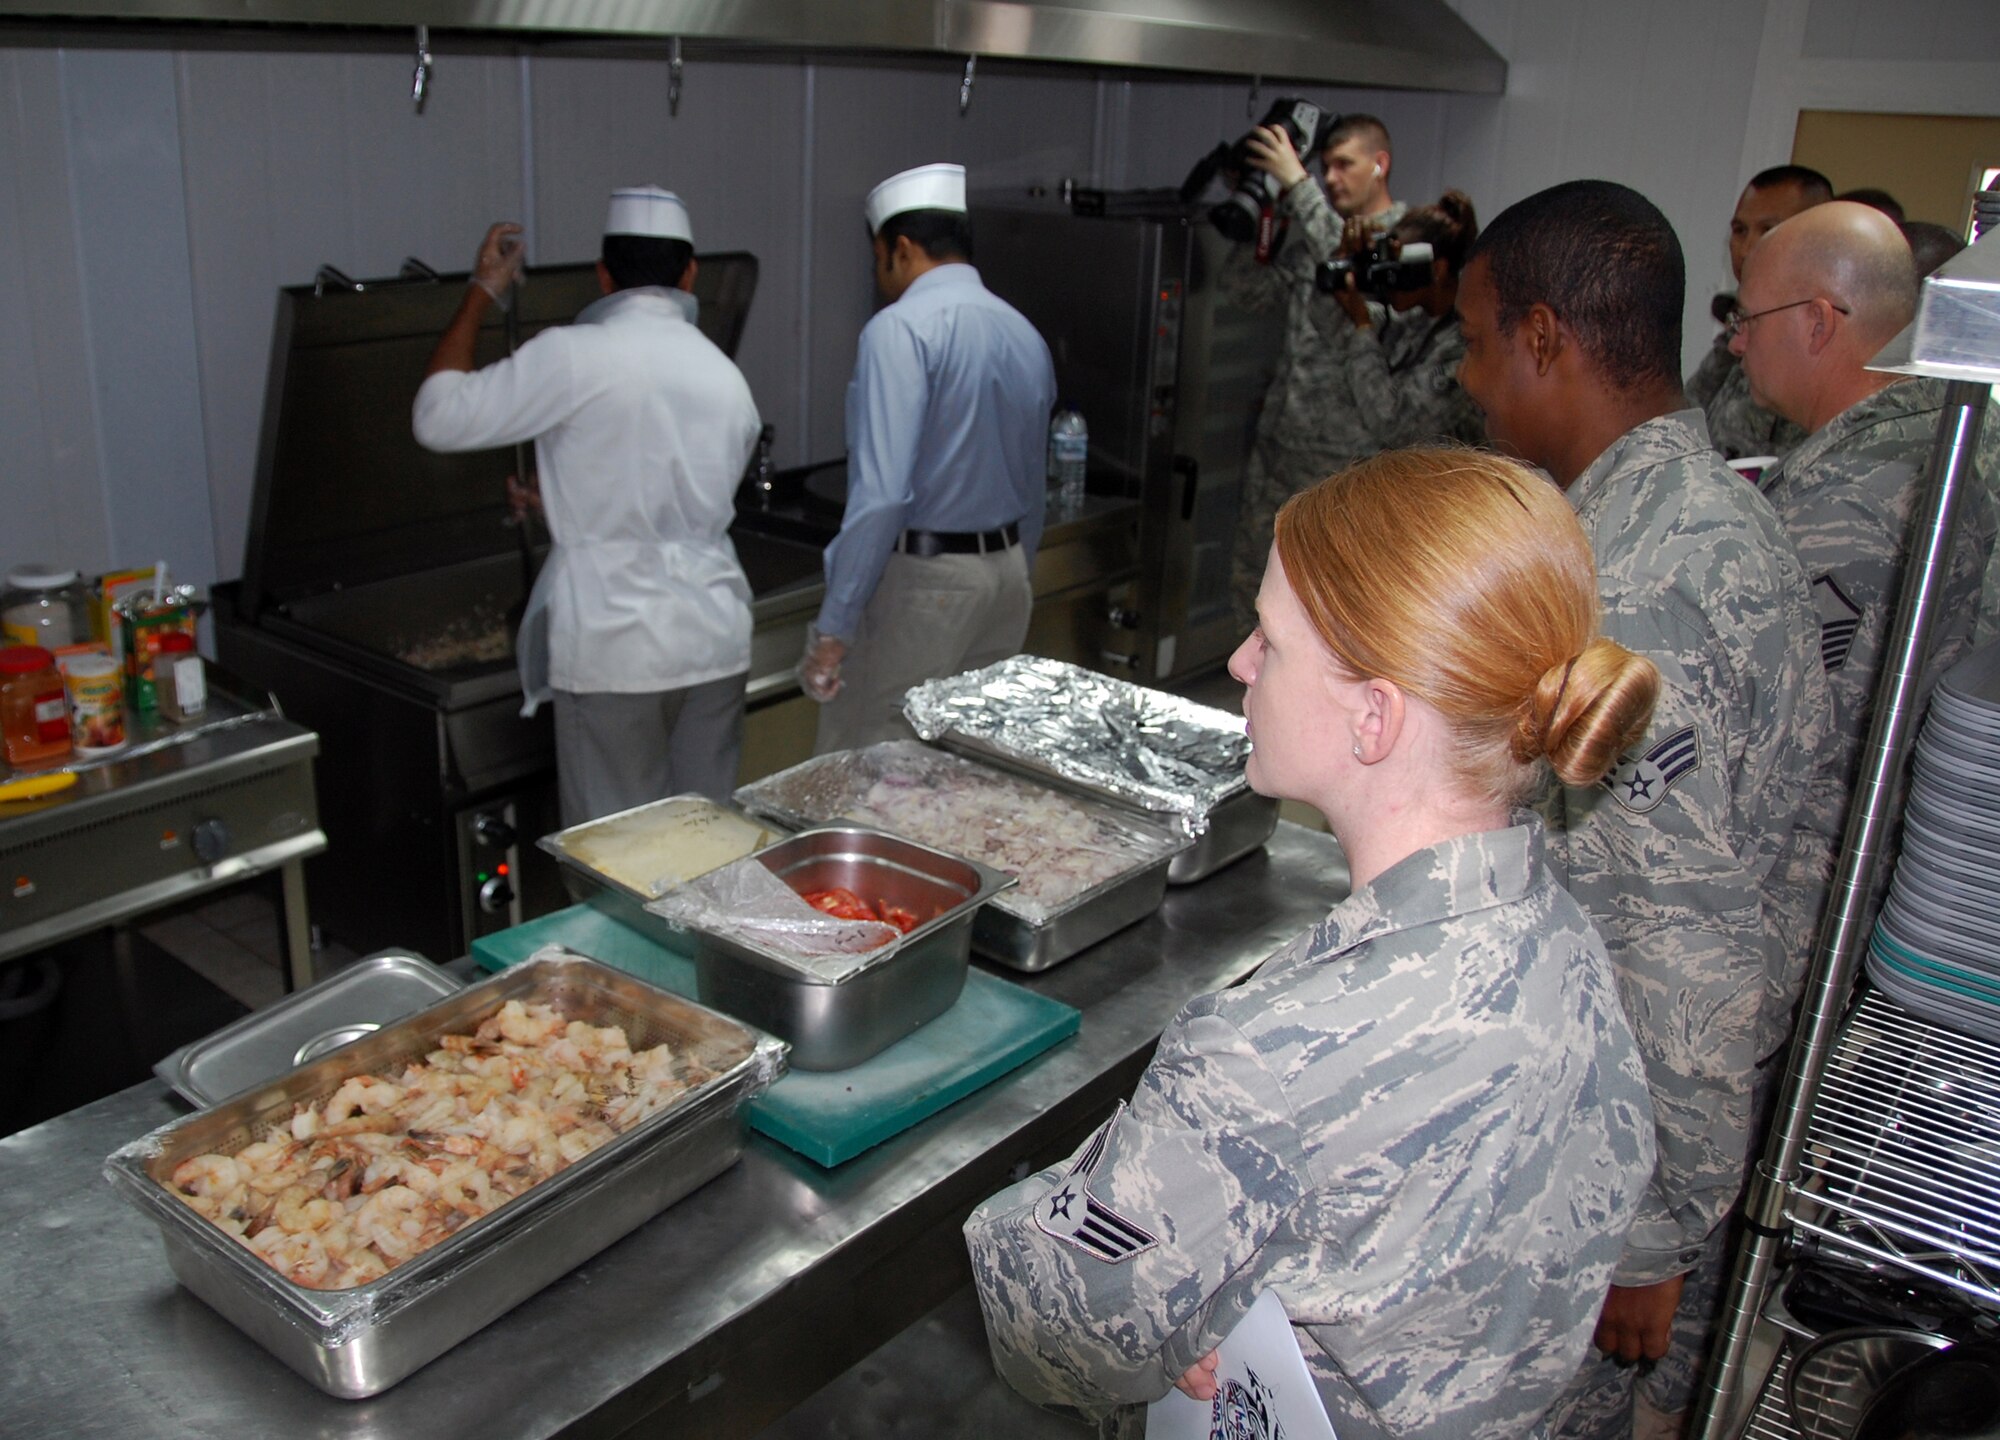 Members of the 387th Air Expeditionary Group watch as the Falcon Cafe staff prepares their favorite Indian food menu items April 6, 2010, during a cooking class at an air base in Southwest Asia. (U.S. Air Force photo/Tech. Sgt. Lindsey Maurice)